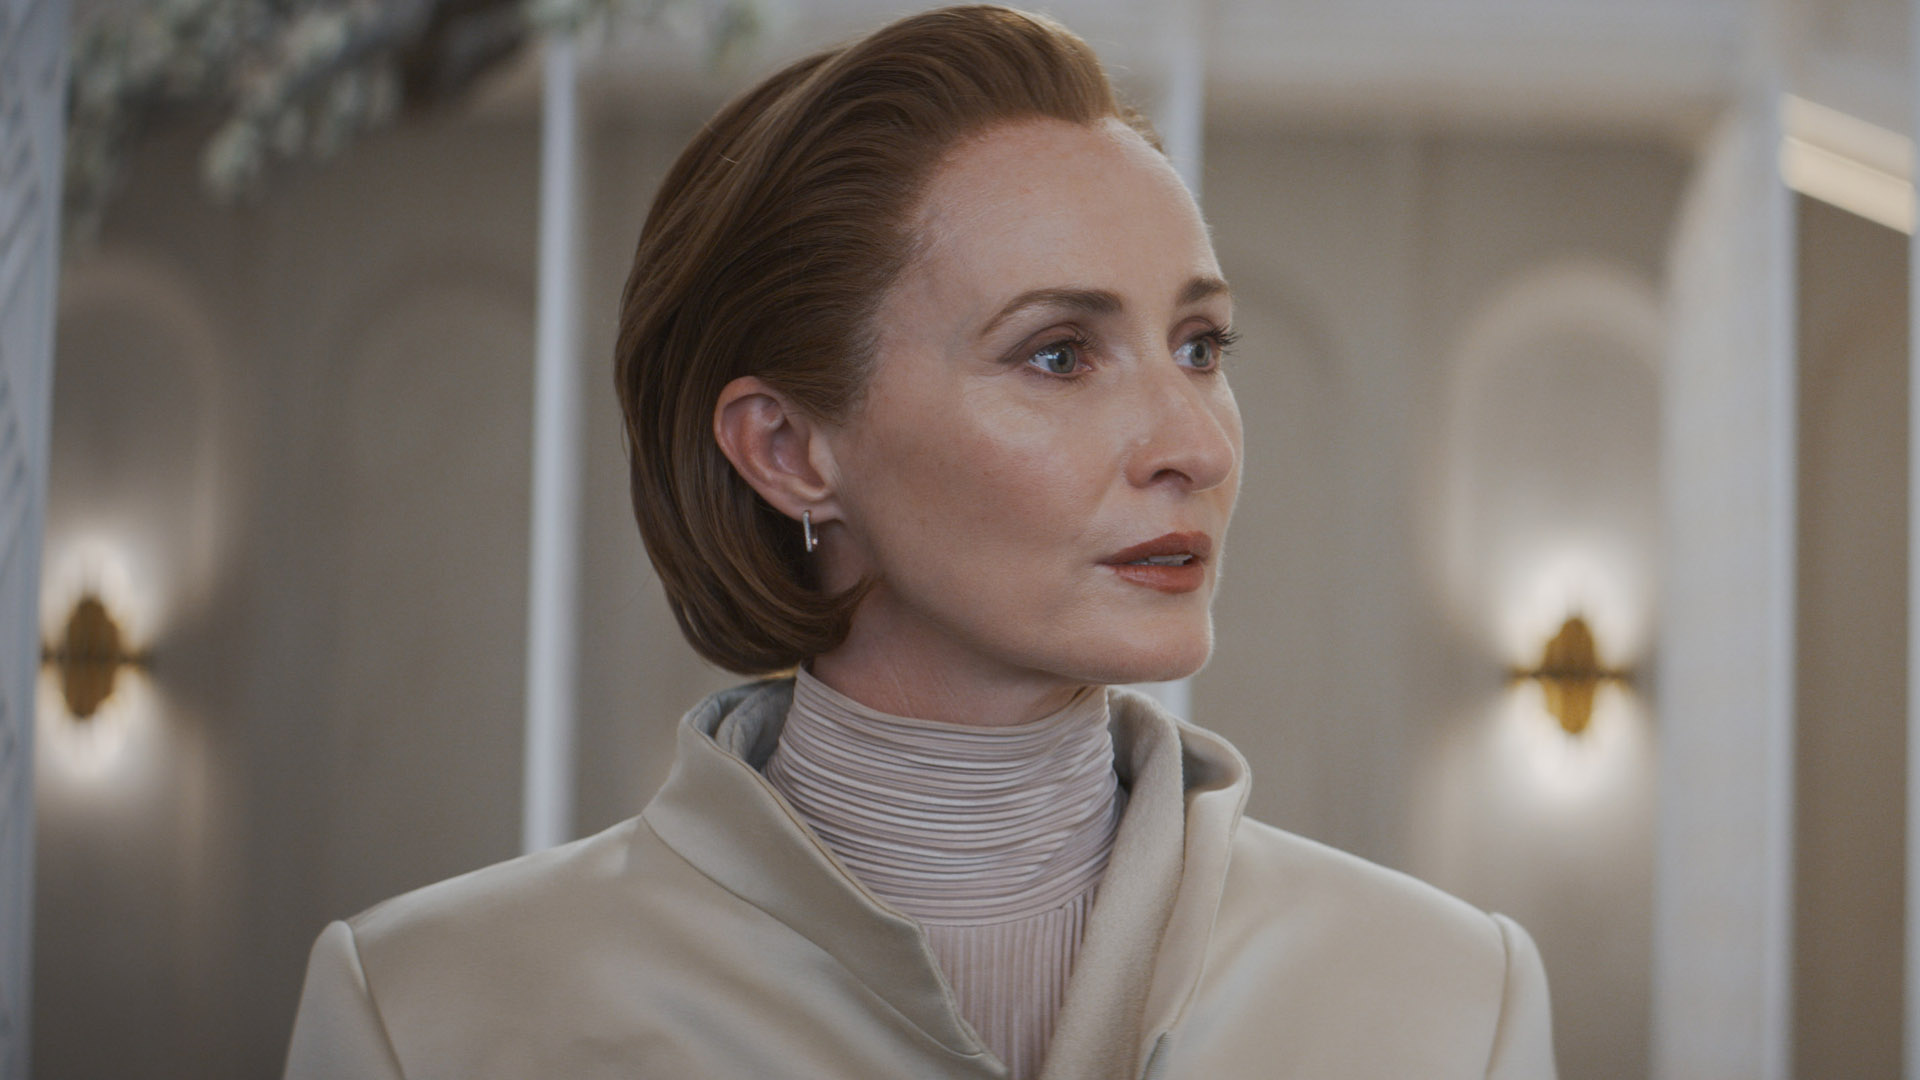 Mon Mothma looks at her husband, who is standing off camera, in Andor on Disney Plus